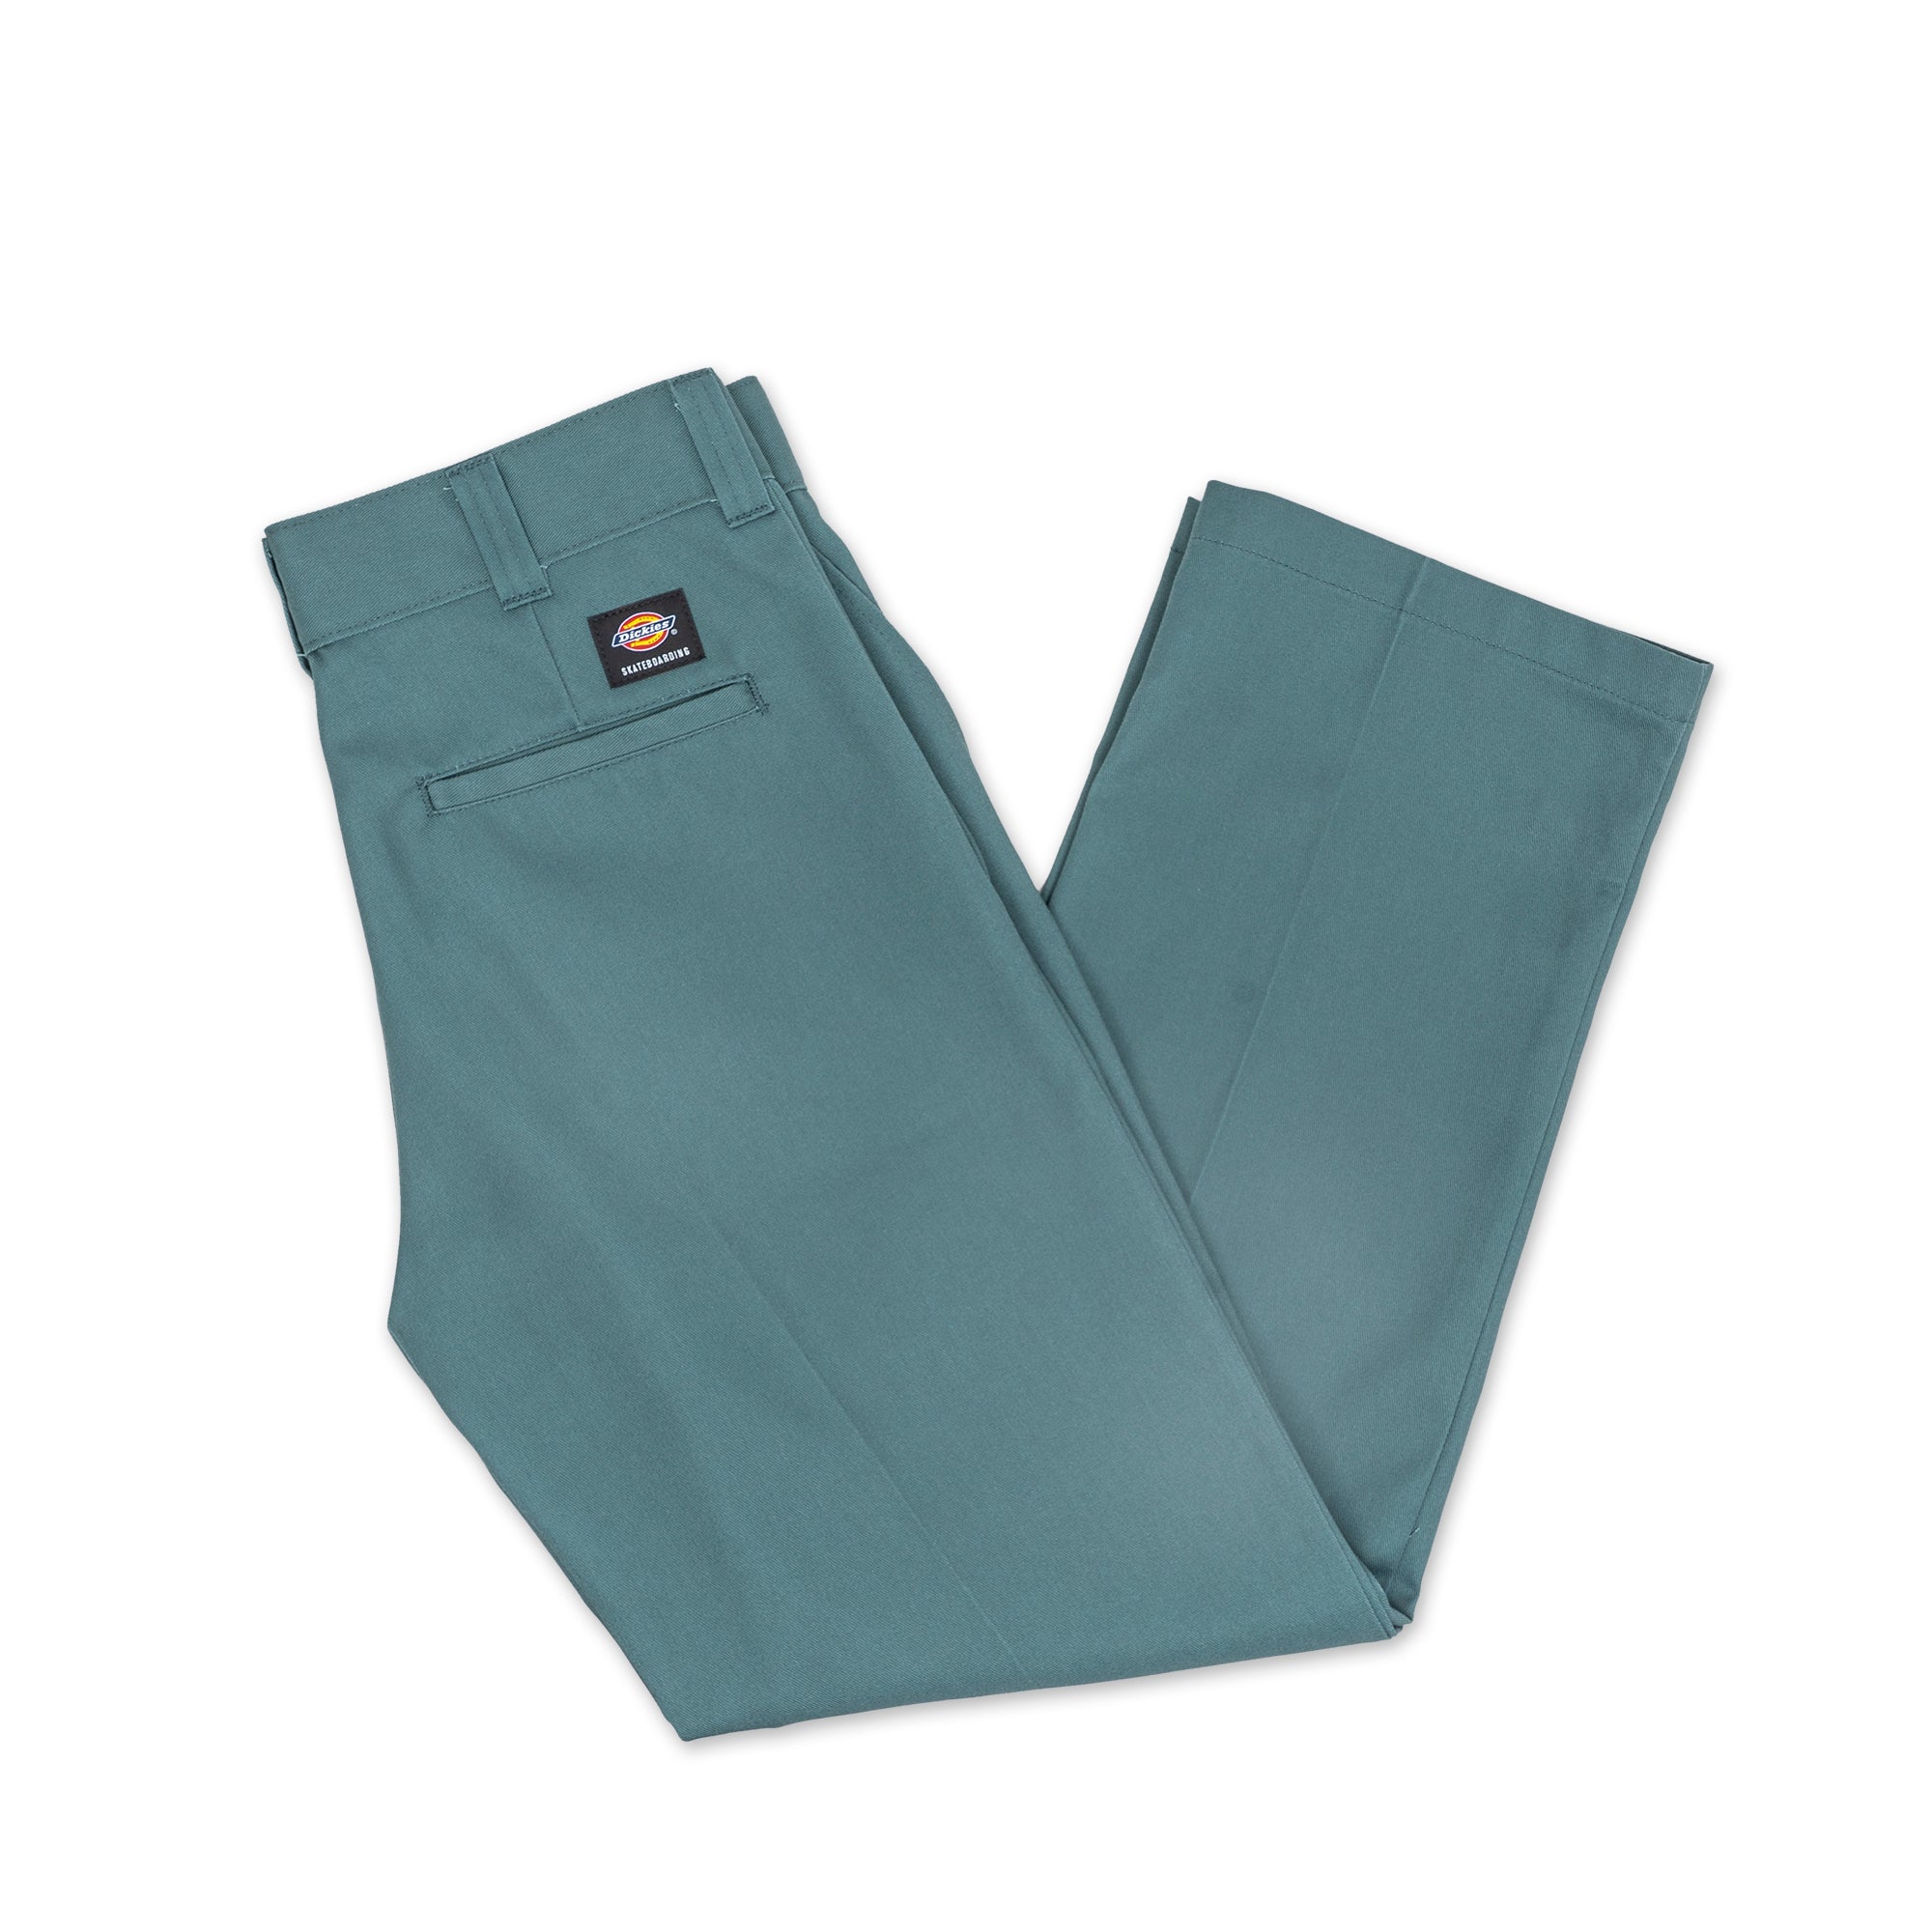 Restock Dickies 874 traditional pants Lincoln green 31x32 (1) pair